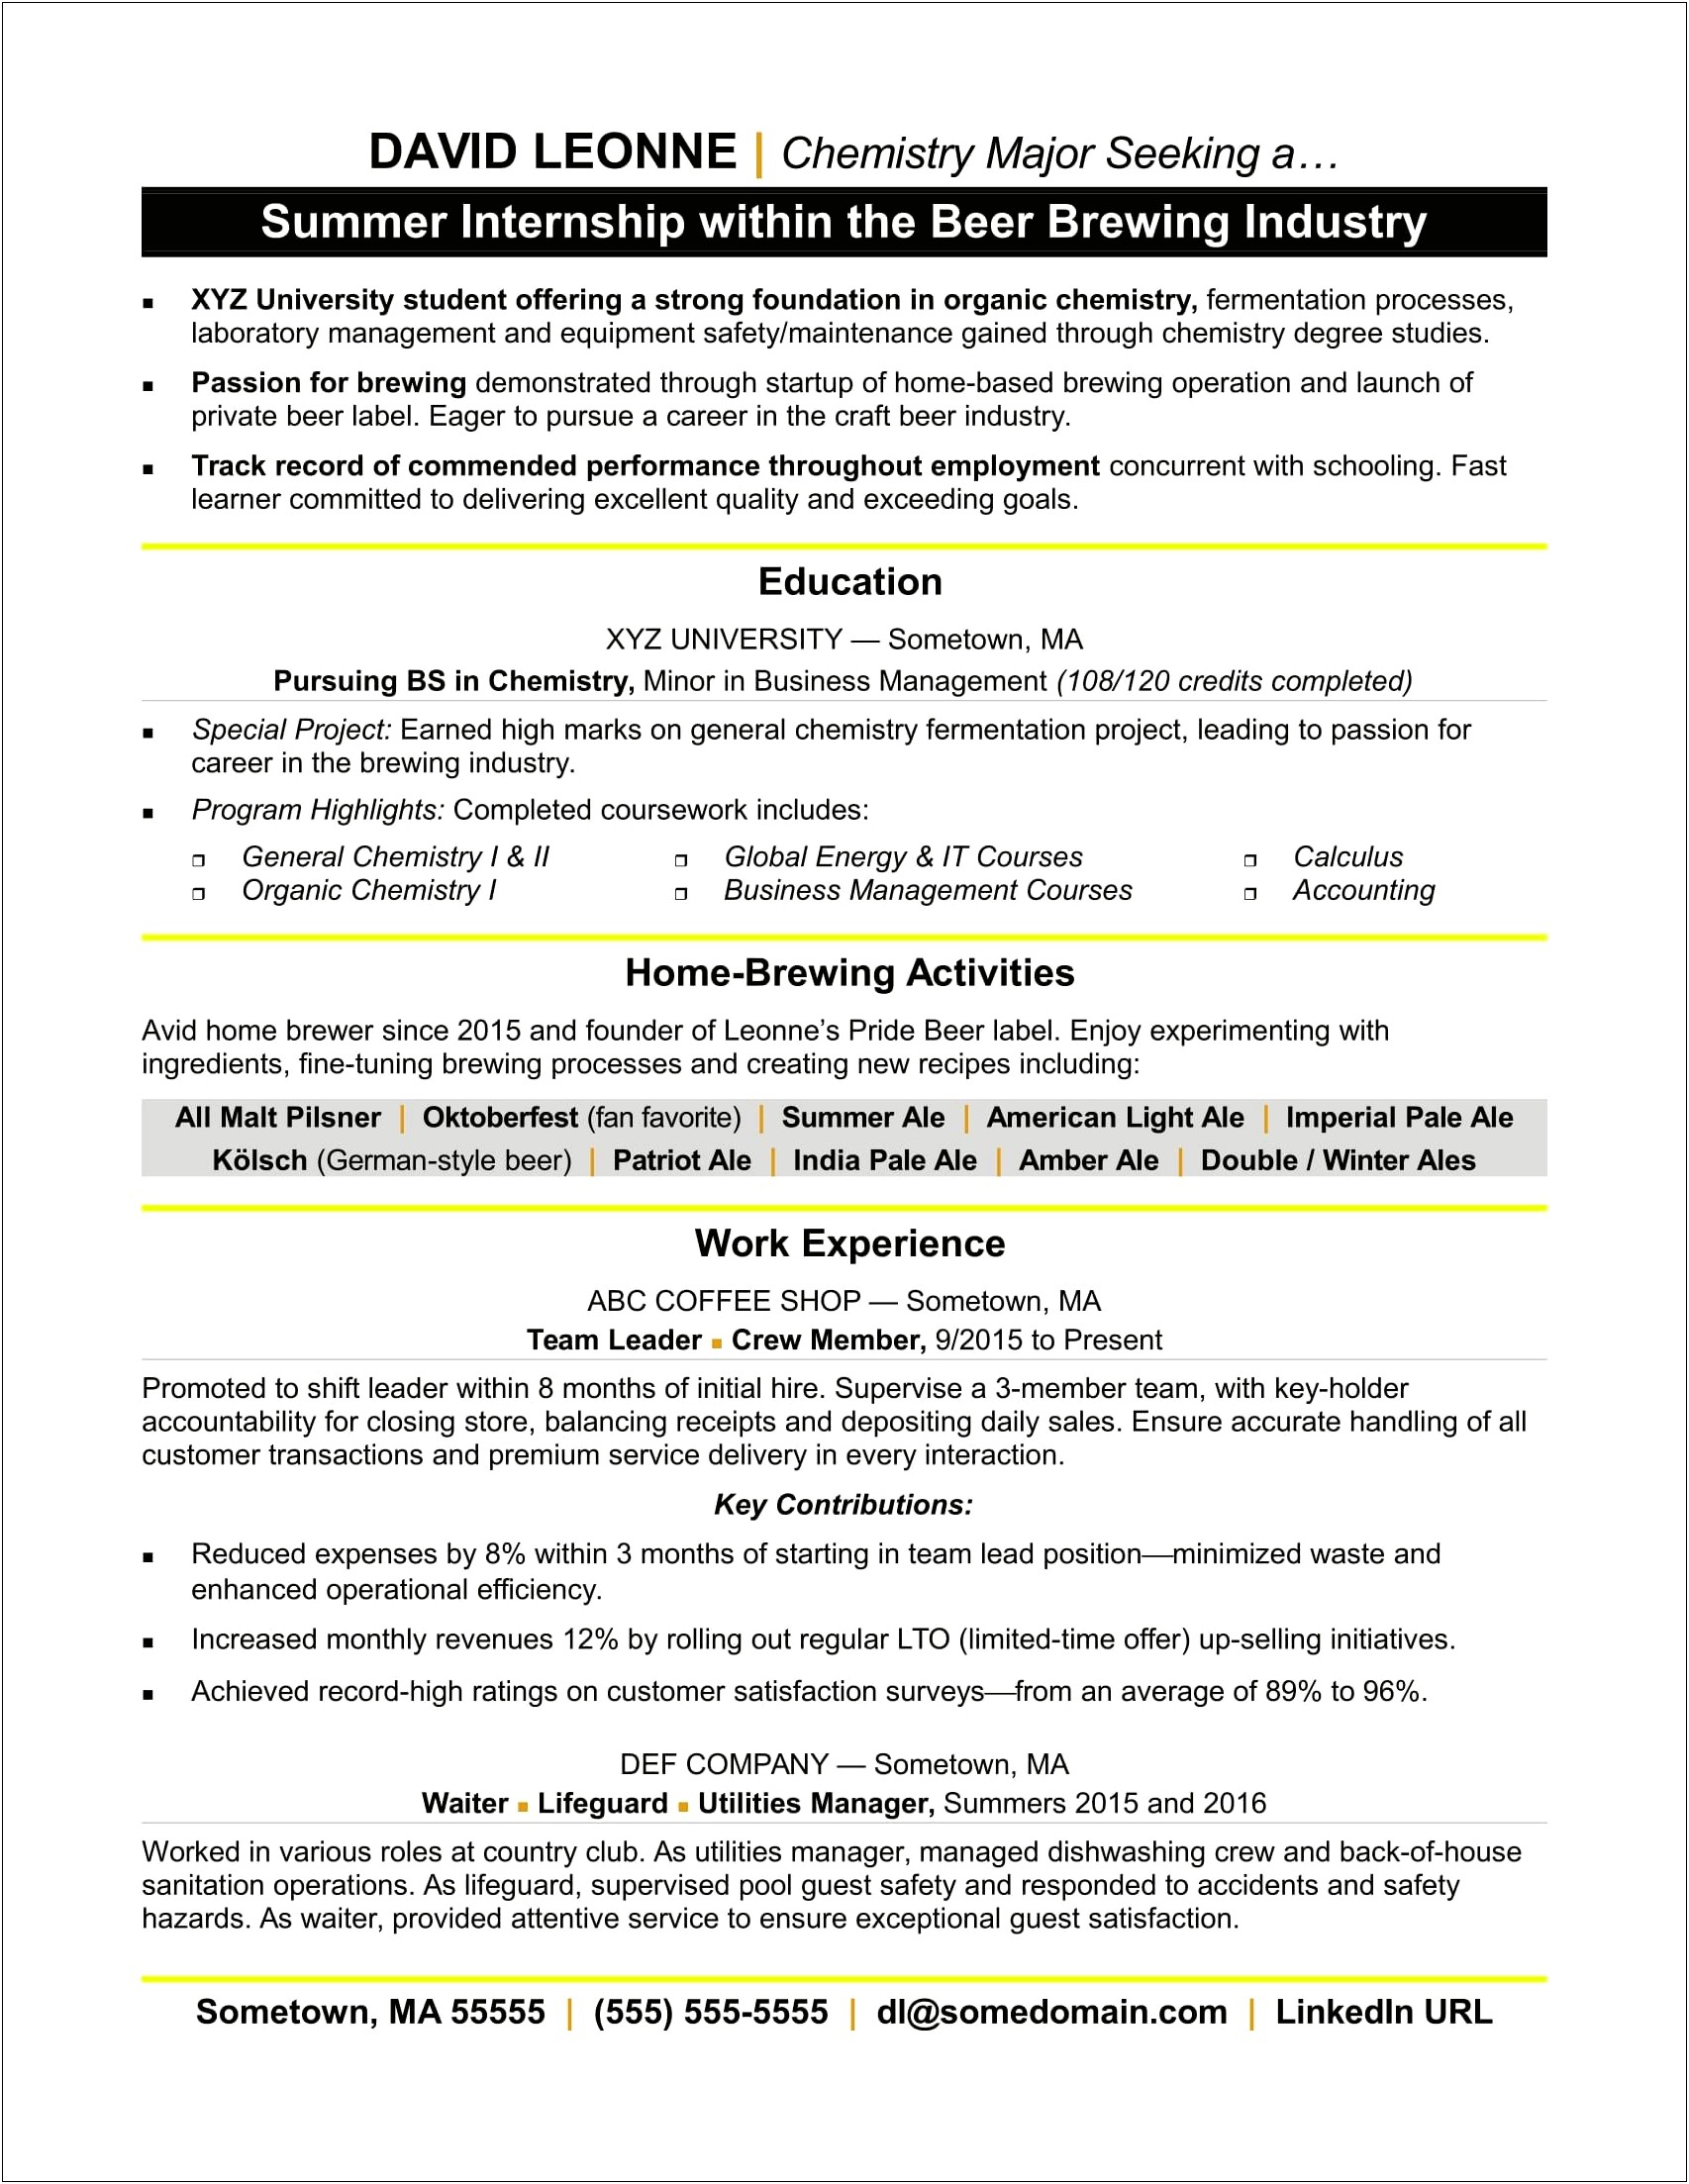 Sample Resume With College Major